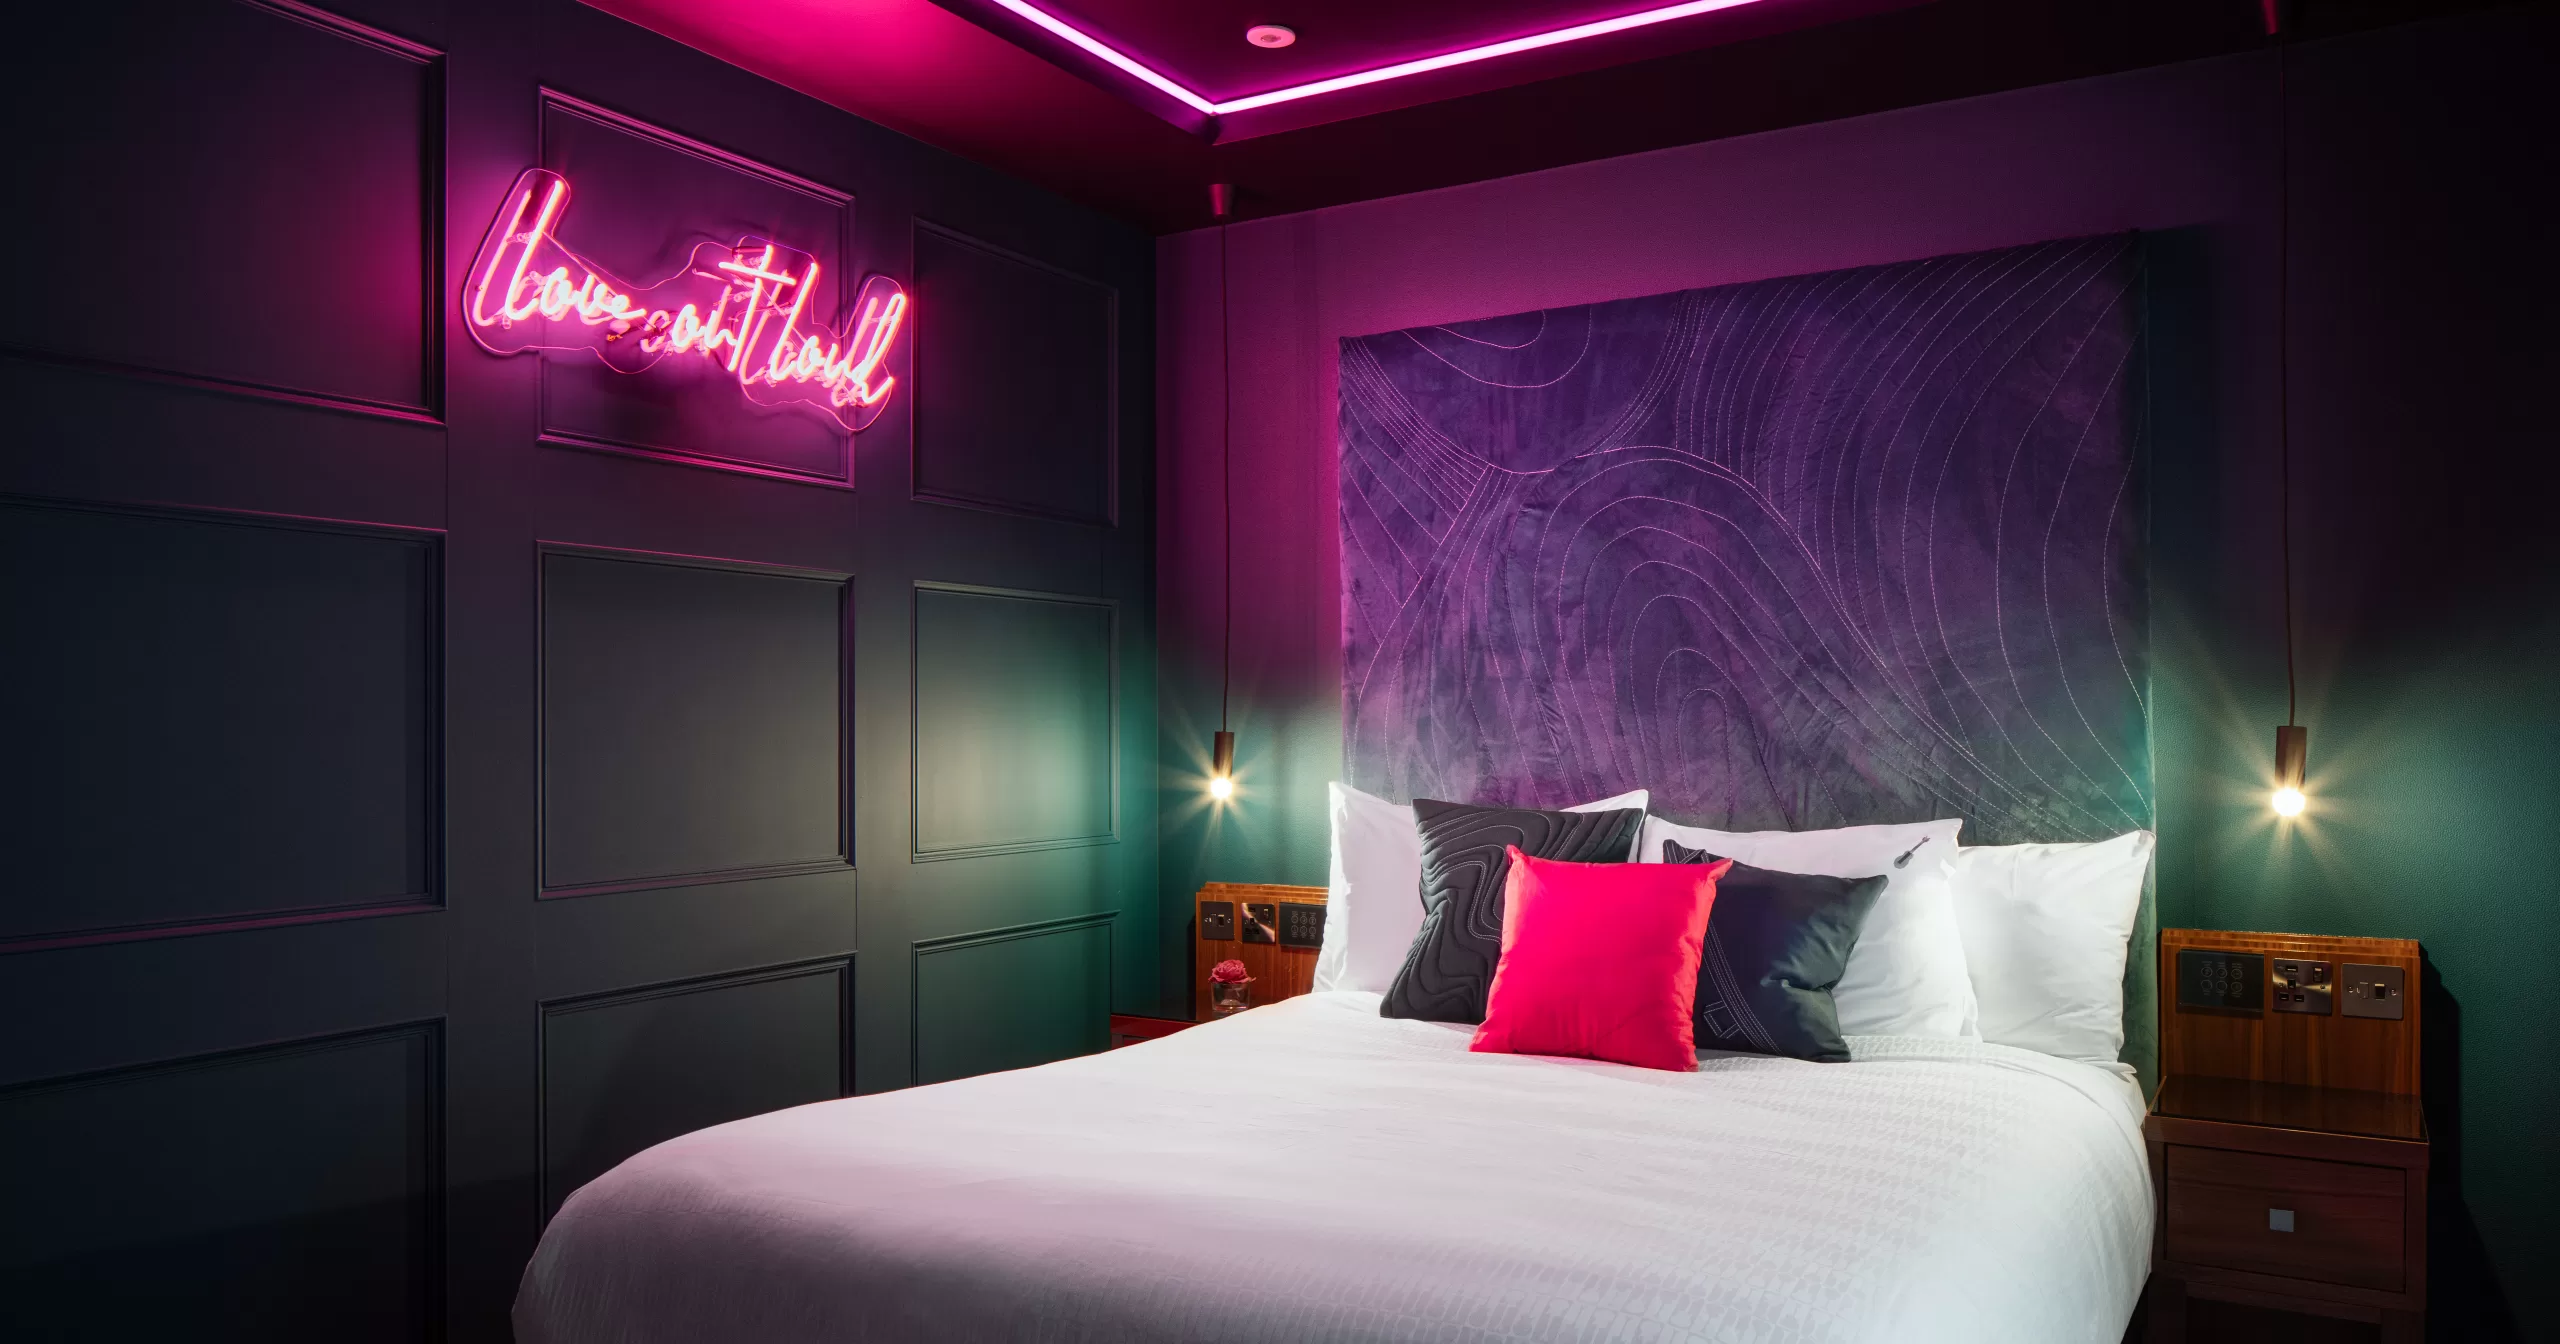 Love Out Loud guest room in the Hard Rock Hotel Dublin.